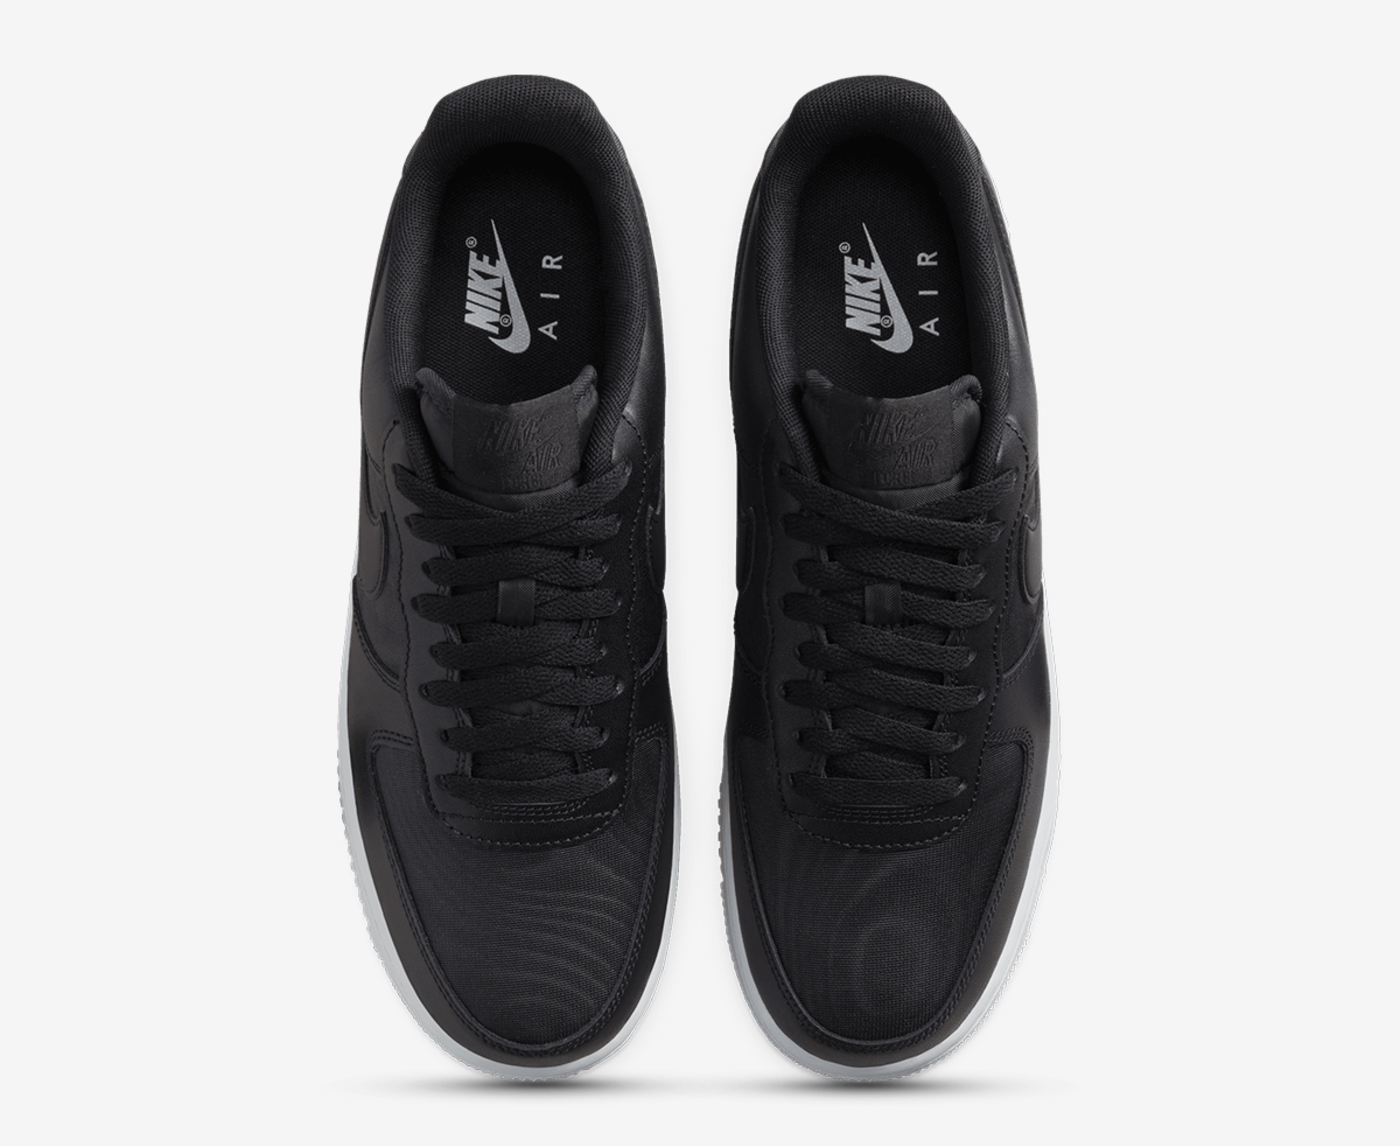 Buy Nike Air Force 1 '07 LV8 from £75.00 (Today) – Best Black